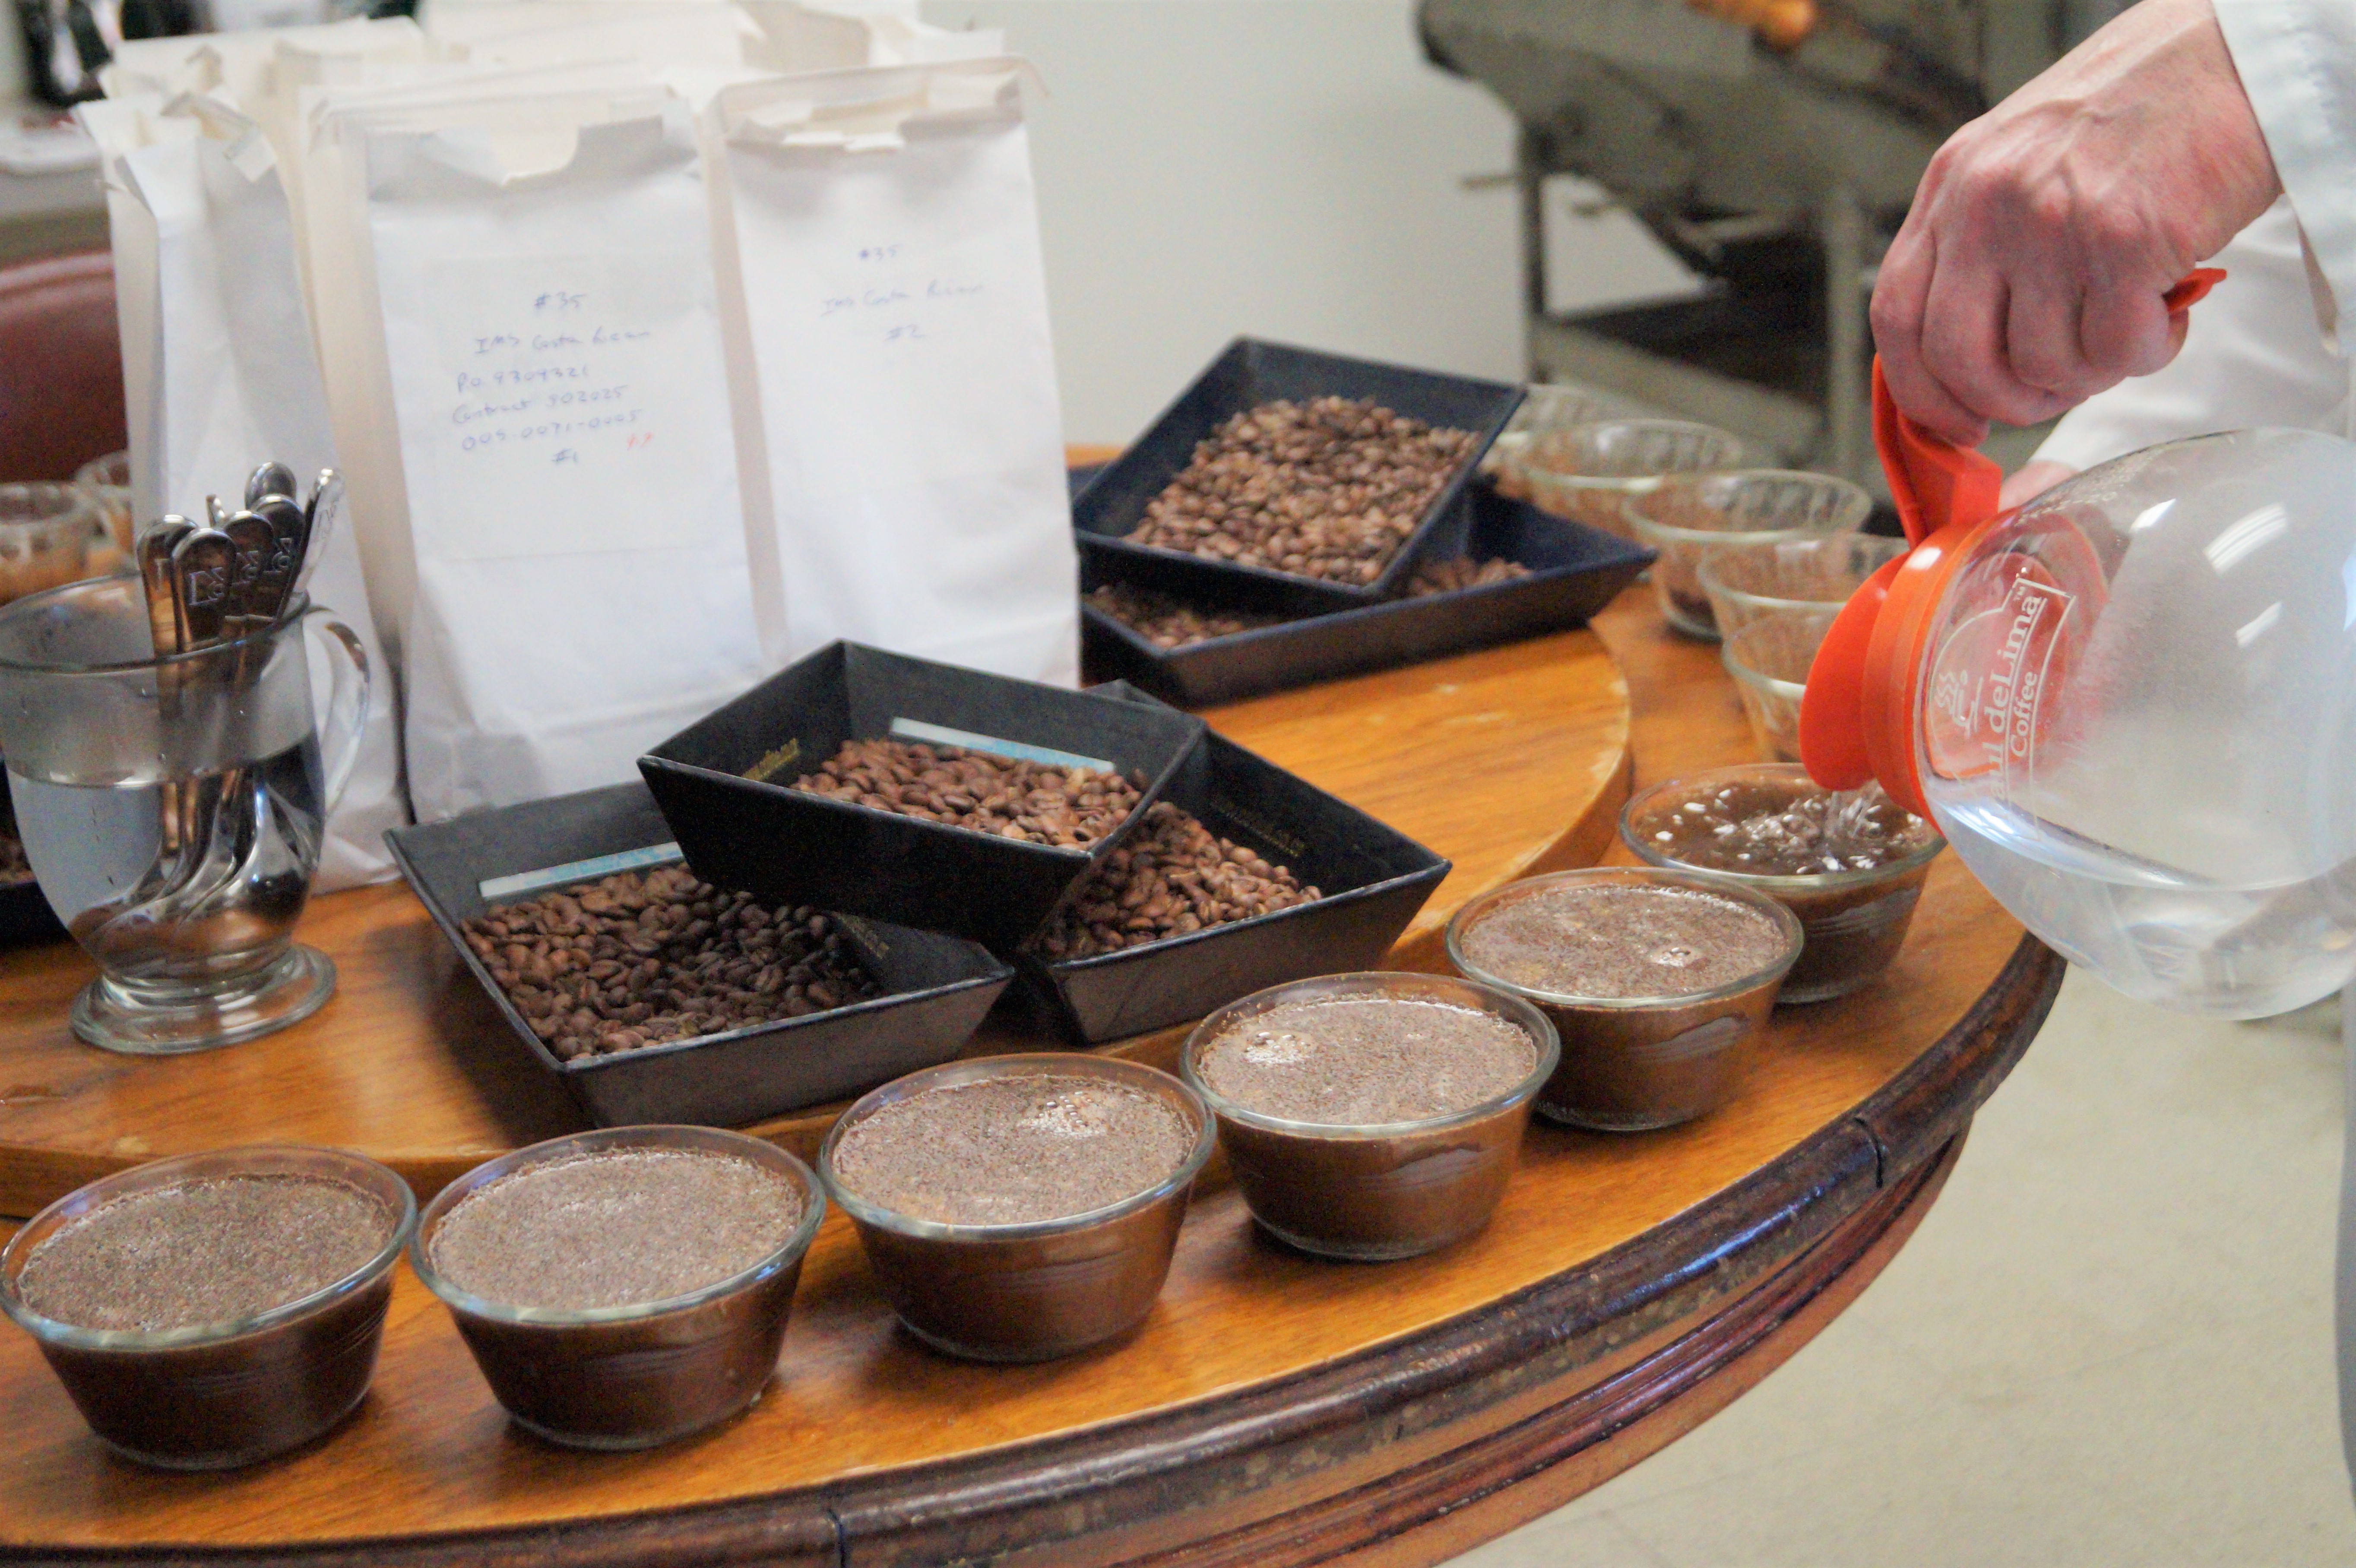 Glenn pours hot water over the coffee grounds to steep them prior to tasting during the cupping process.